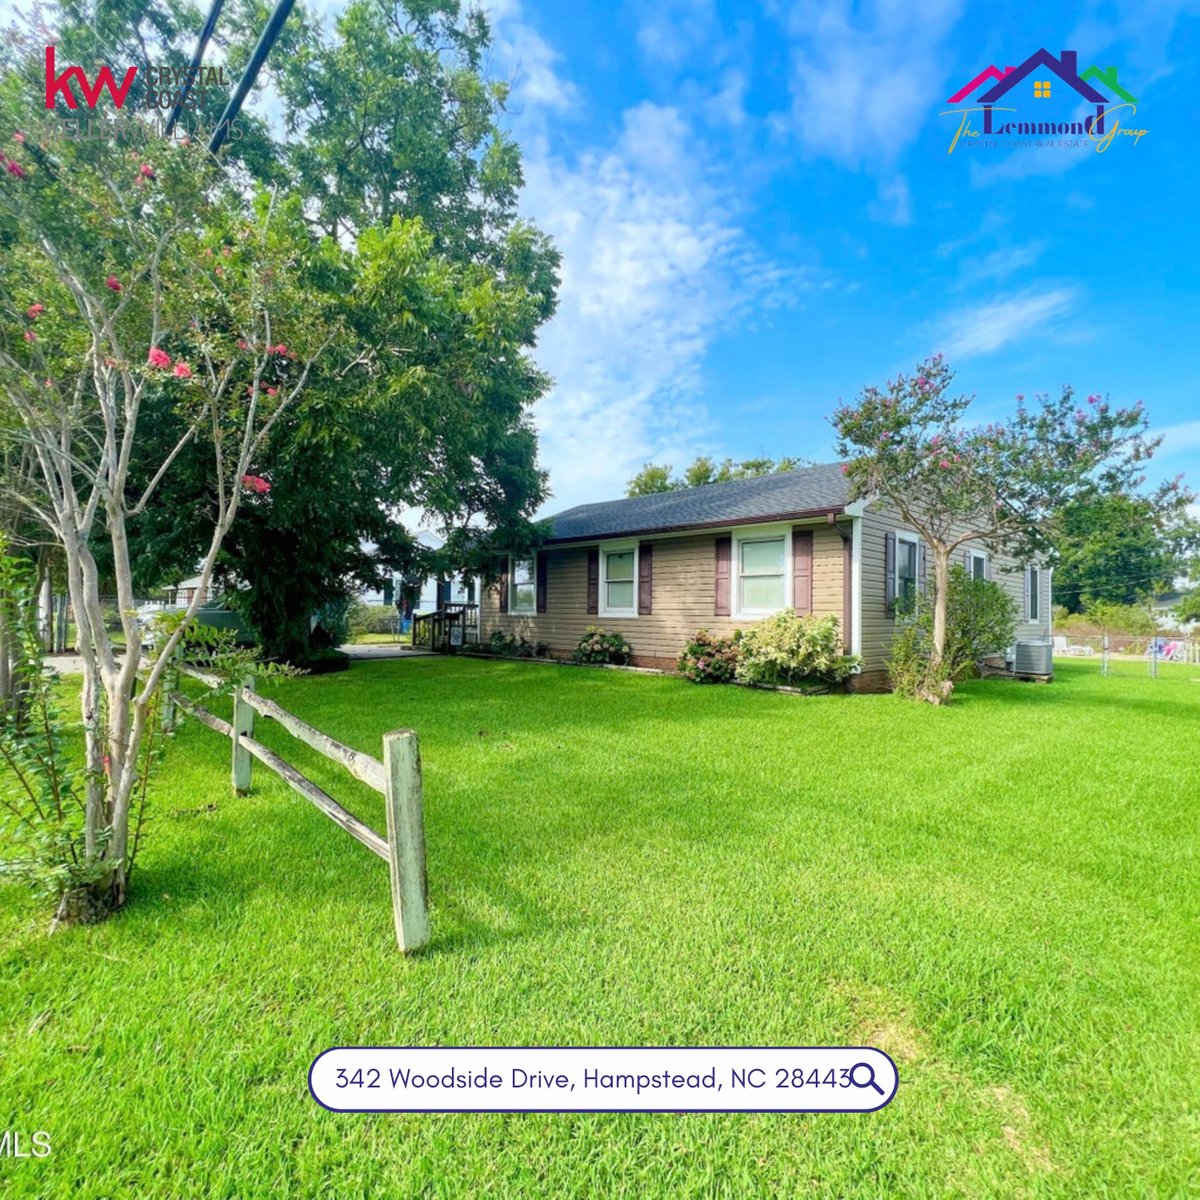 🔑 Happy Friday! This property located in MOREHEAD CITY, NC is now 𝐔𝐍𝐃𝐄𝐑 𝐂𝐎𝐍𝐓𝐑𝐀𝐂𝐓! 💯 The Lemmond Group is representing the SELLERS! Congratulations to our wonderful clients! #ncrealestate  #realestateinvestment #beachliving #coastalliving  #kwcc #crystalcoasthomes